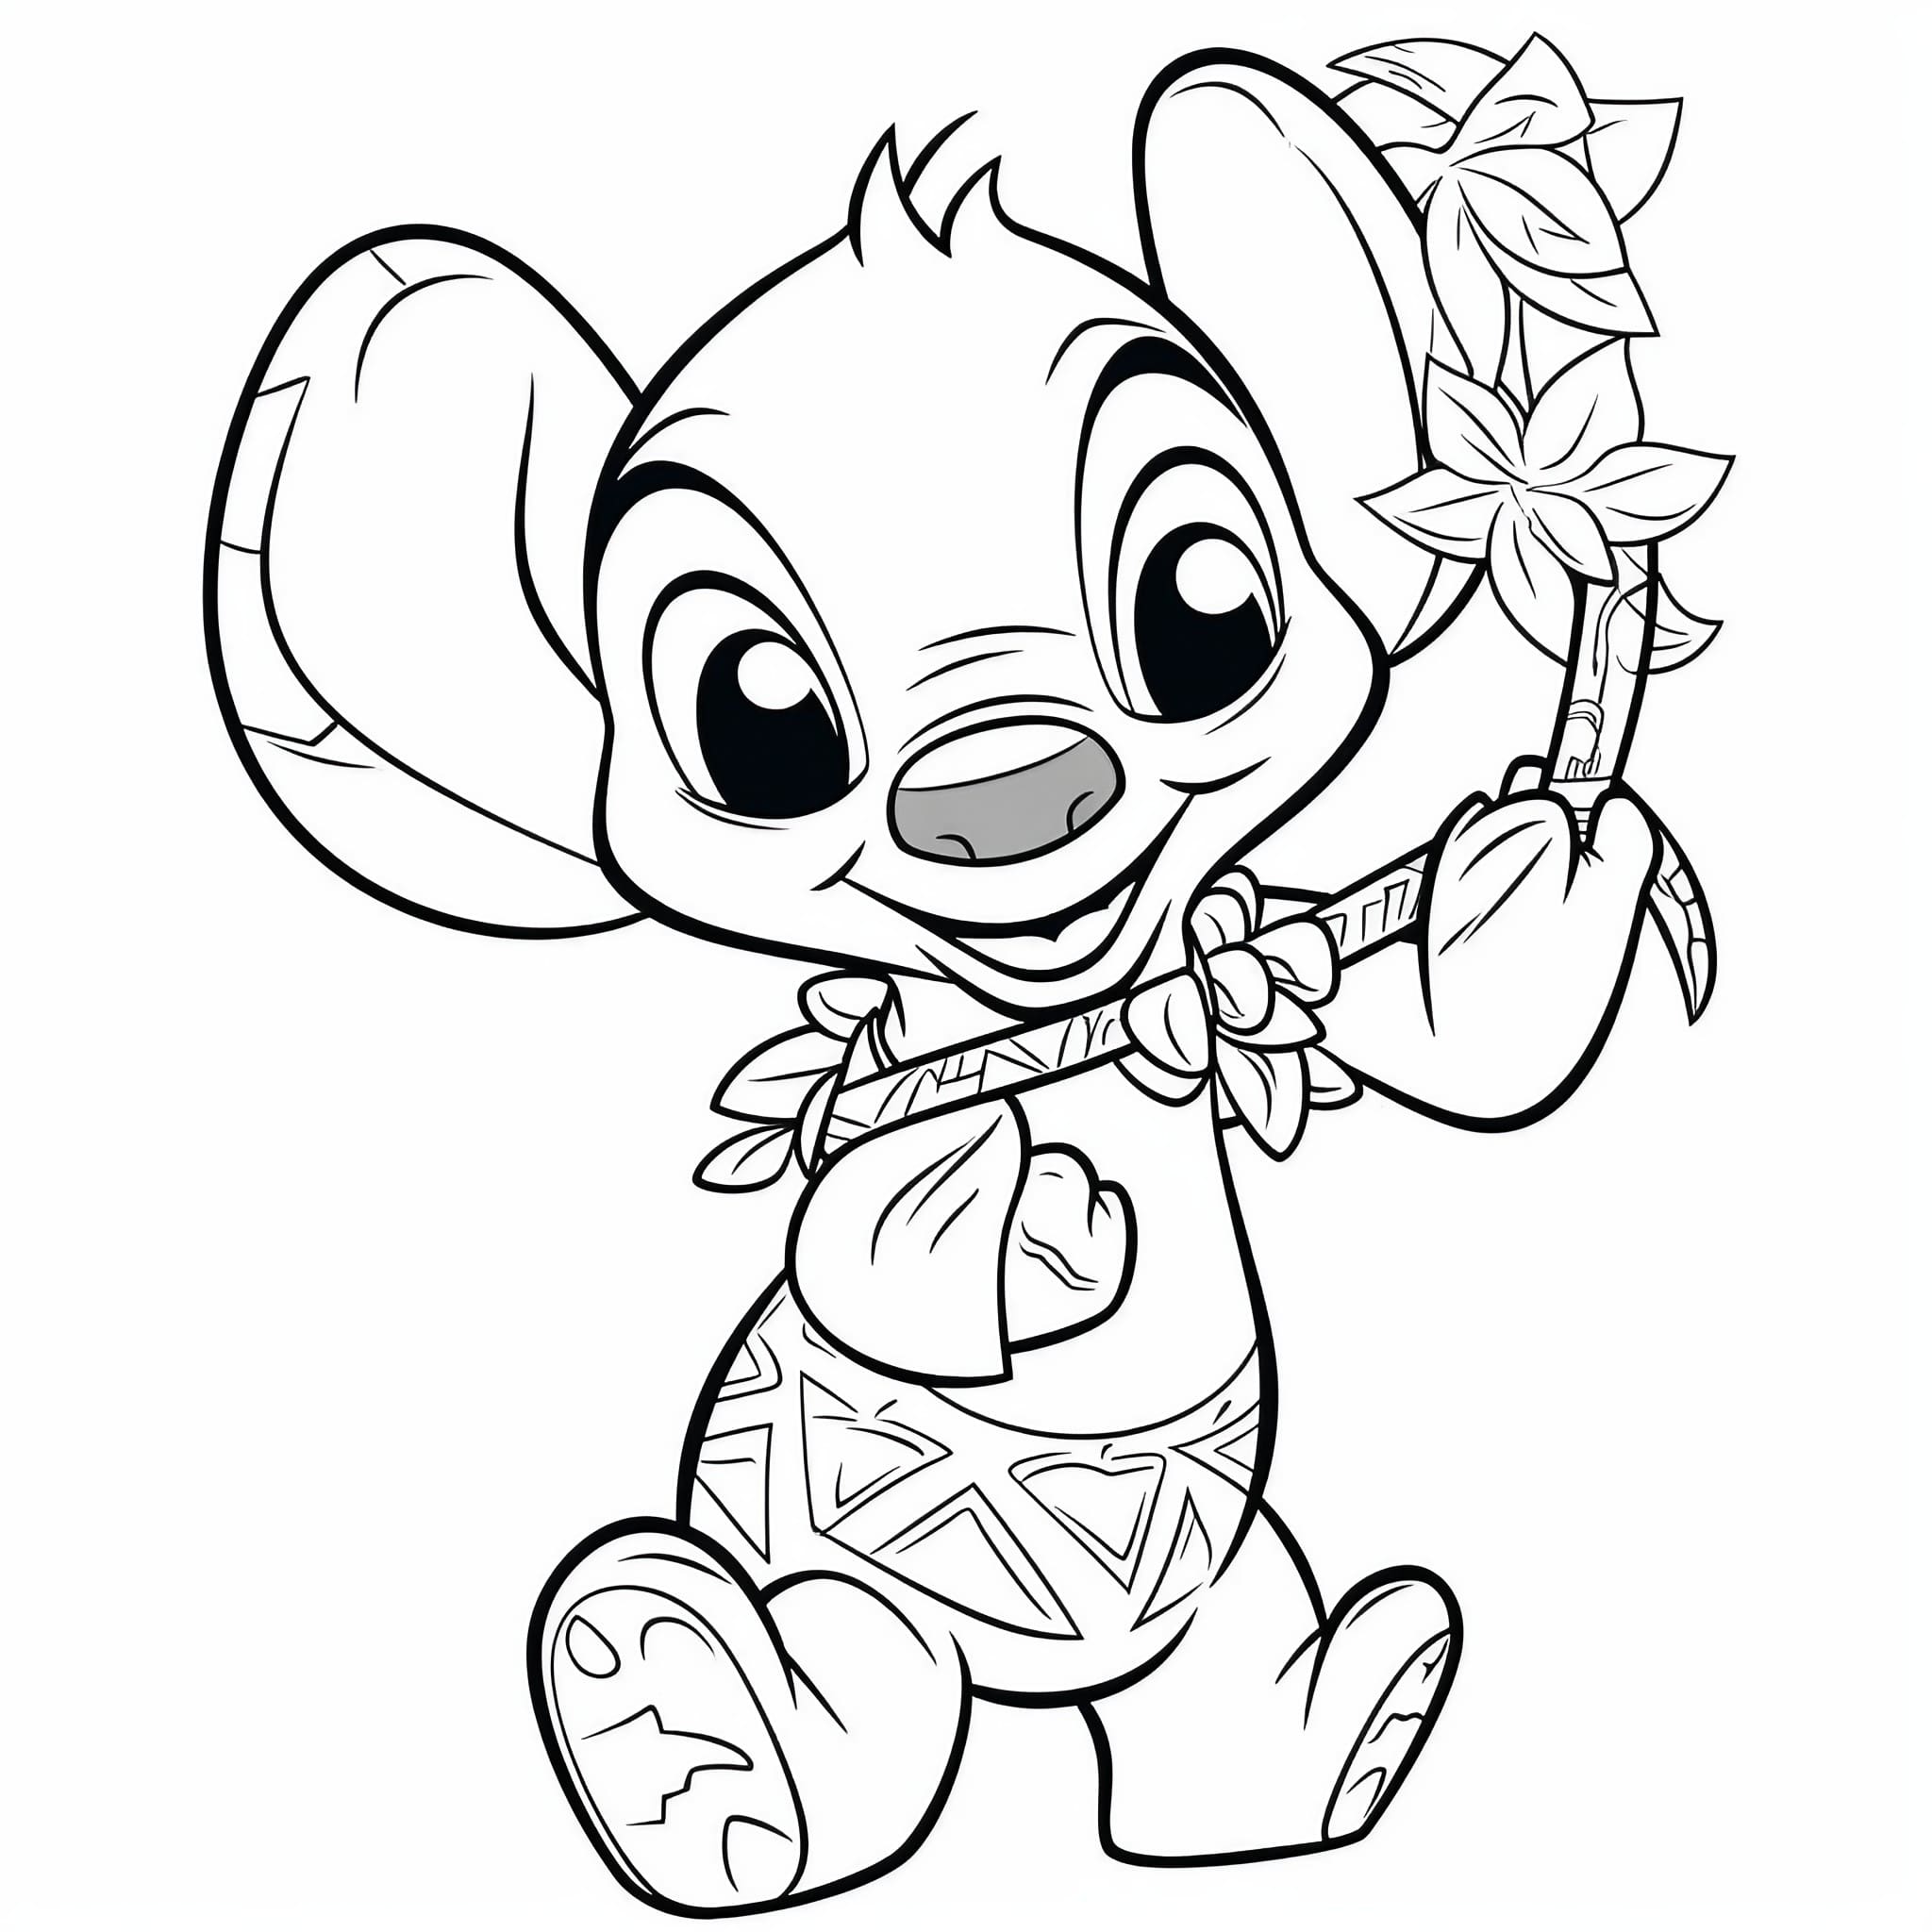 Stitch coloring pages for free and printable